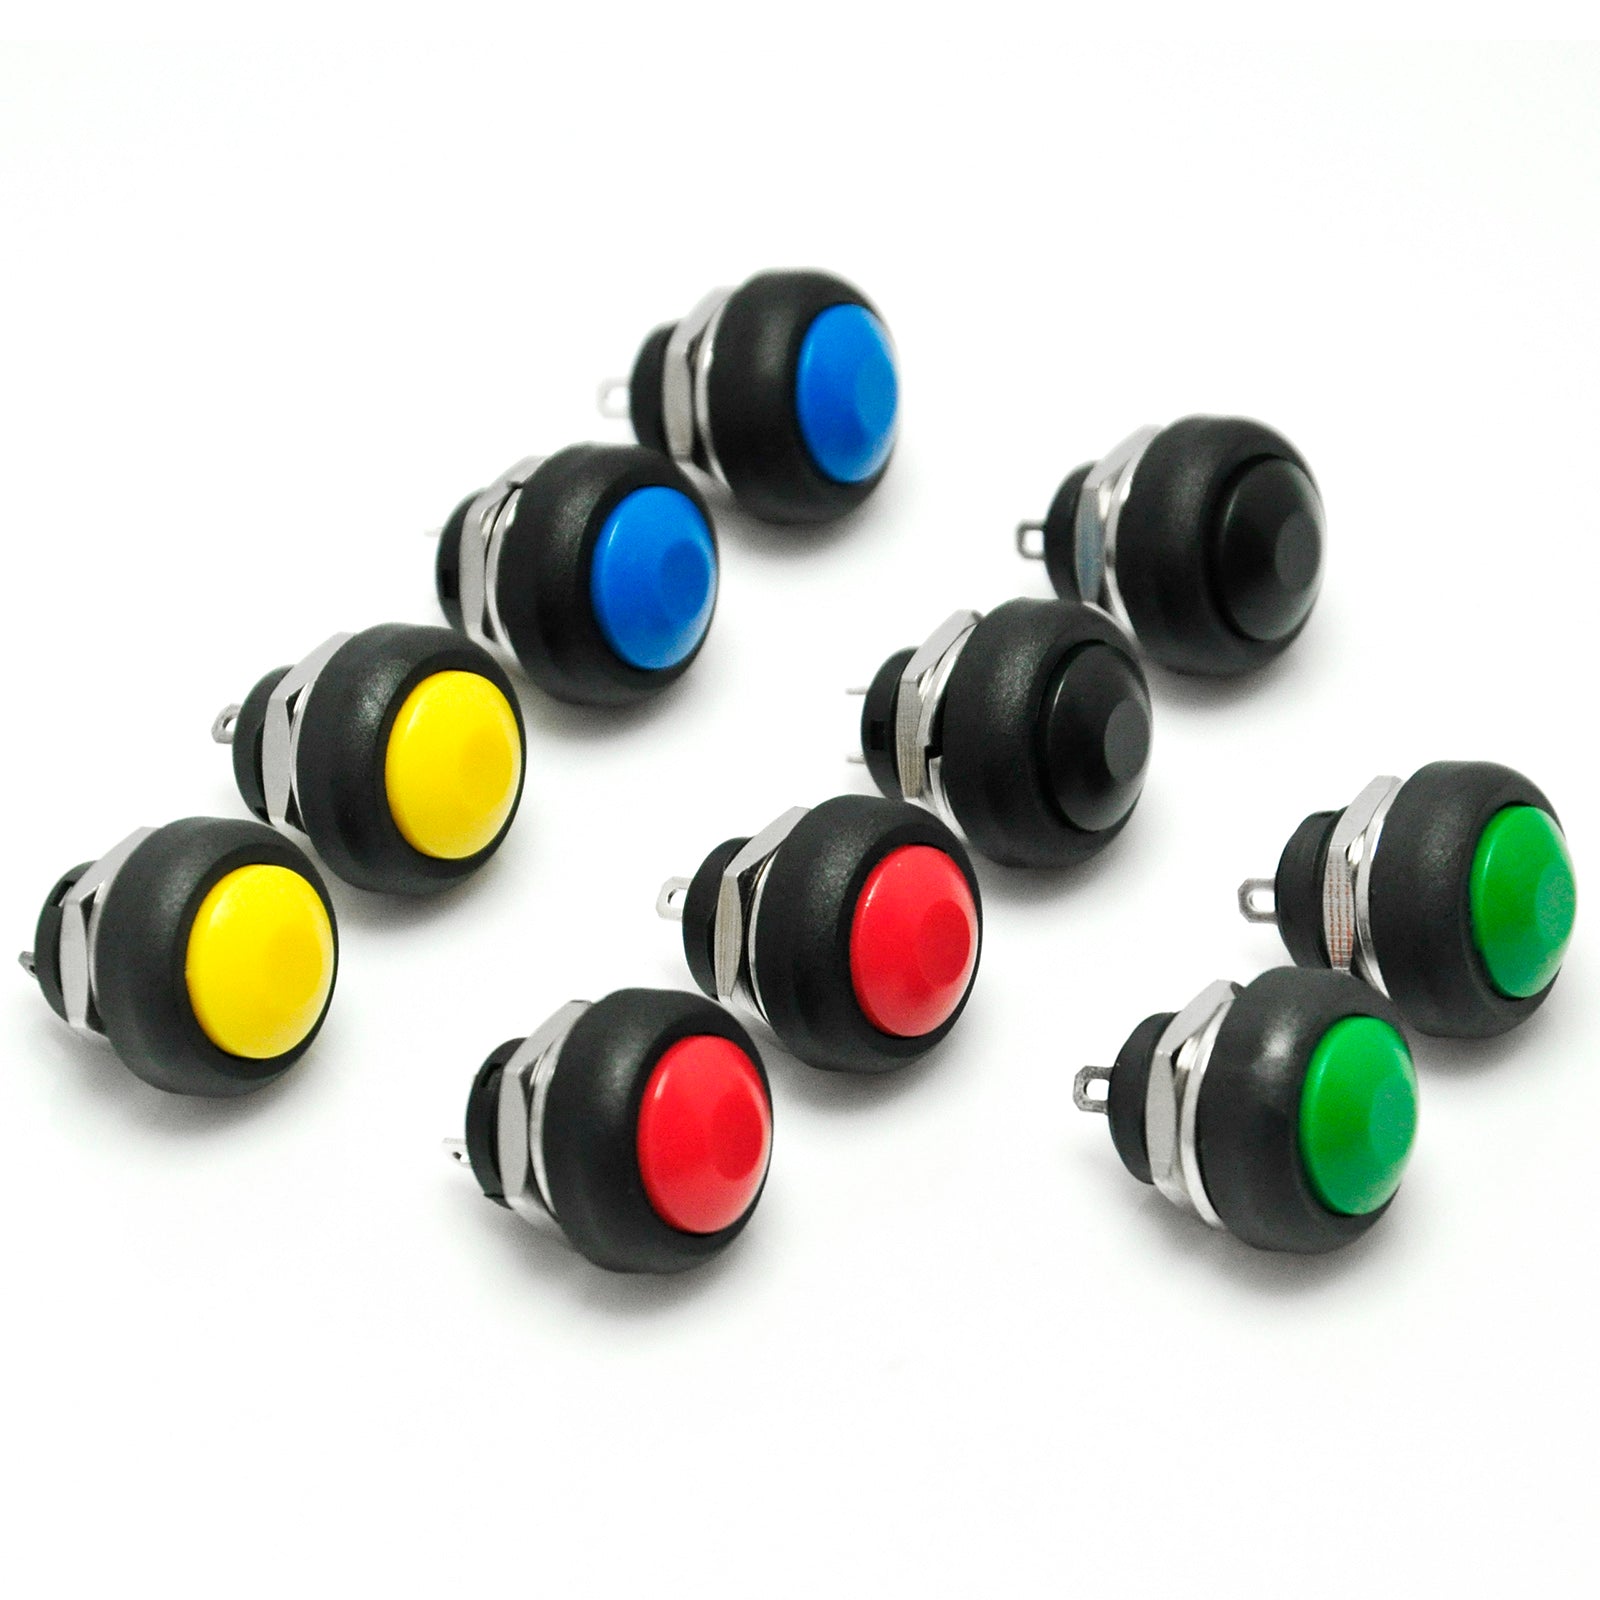 Gikfun 12mm Waterproof Push Button Momentary On Off Switch 5 Colors DIY Kit for Arduino (Pack of 10pcs)